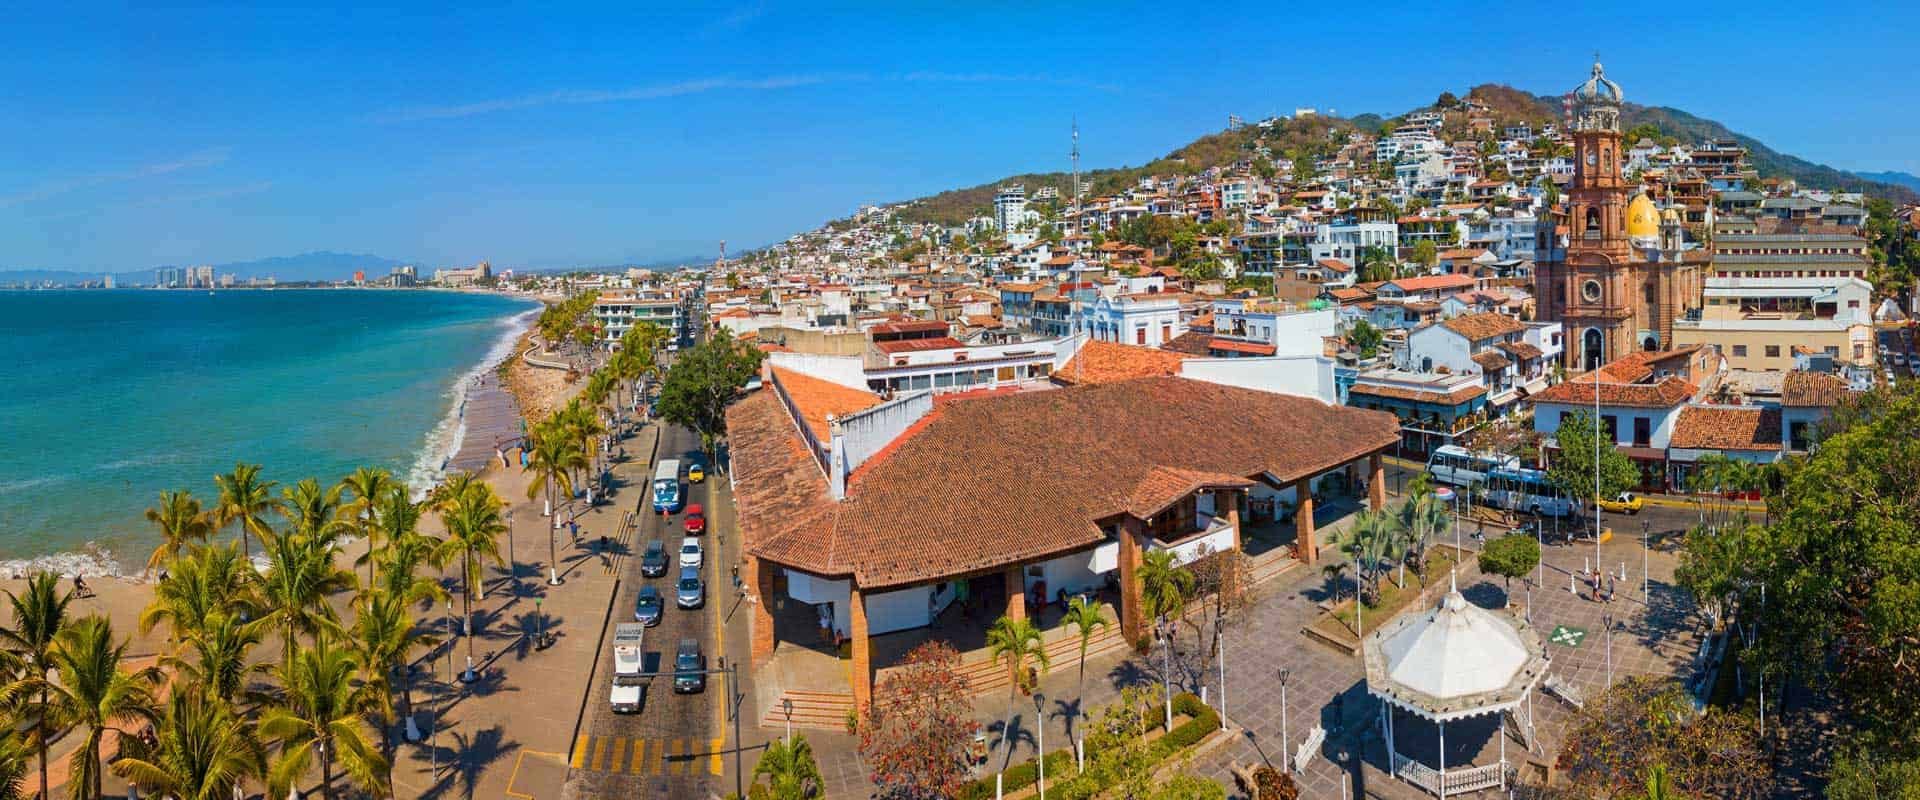 Why choose Vallarta/Nayarit for your new home?